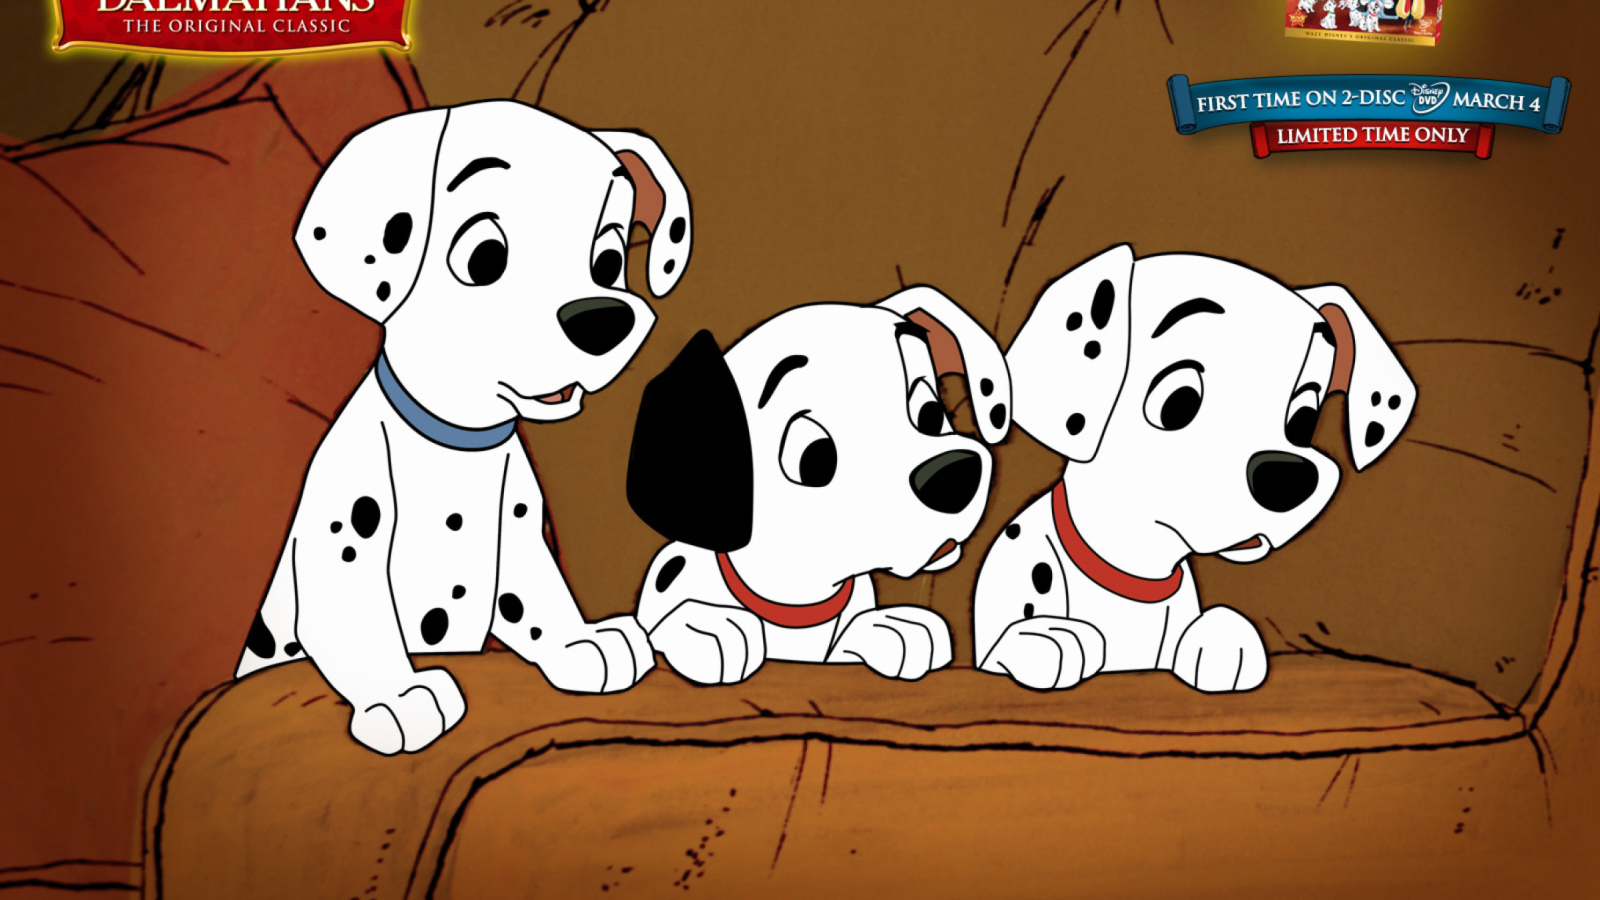 Das One Hundred and One Dalmatians Wallpaper 1600x900